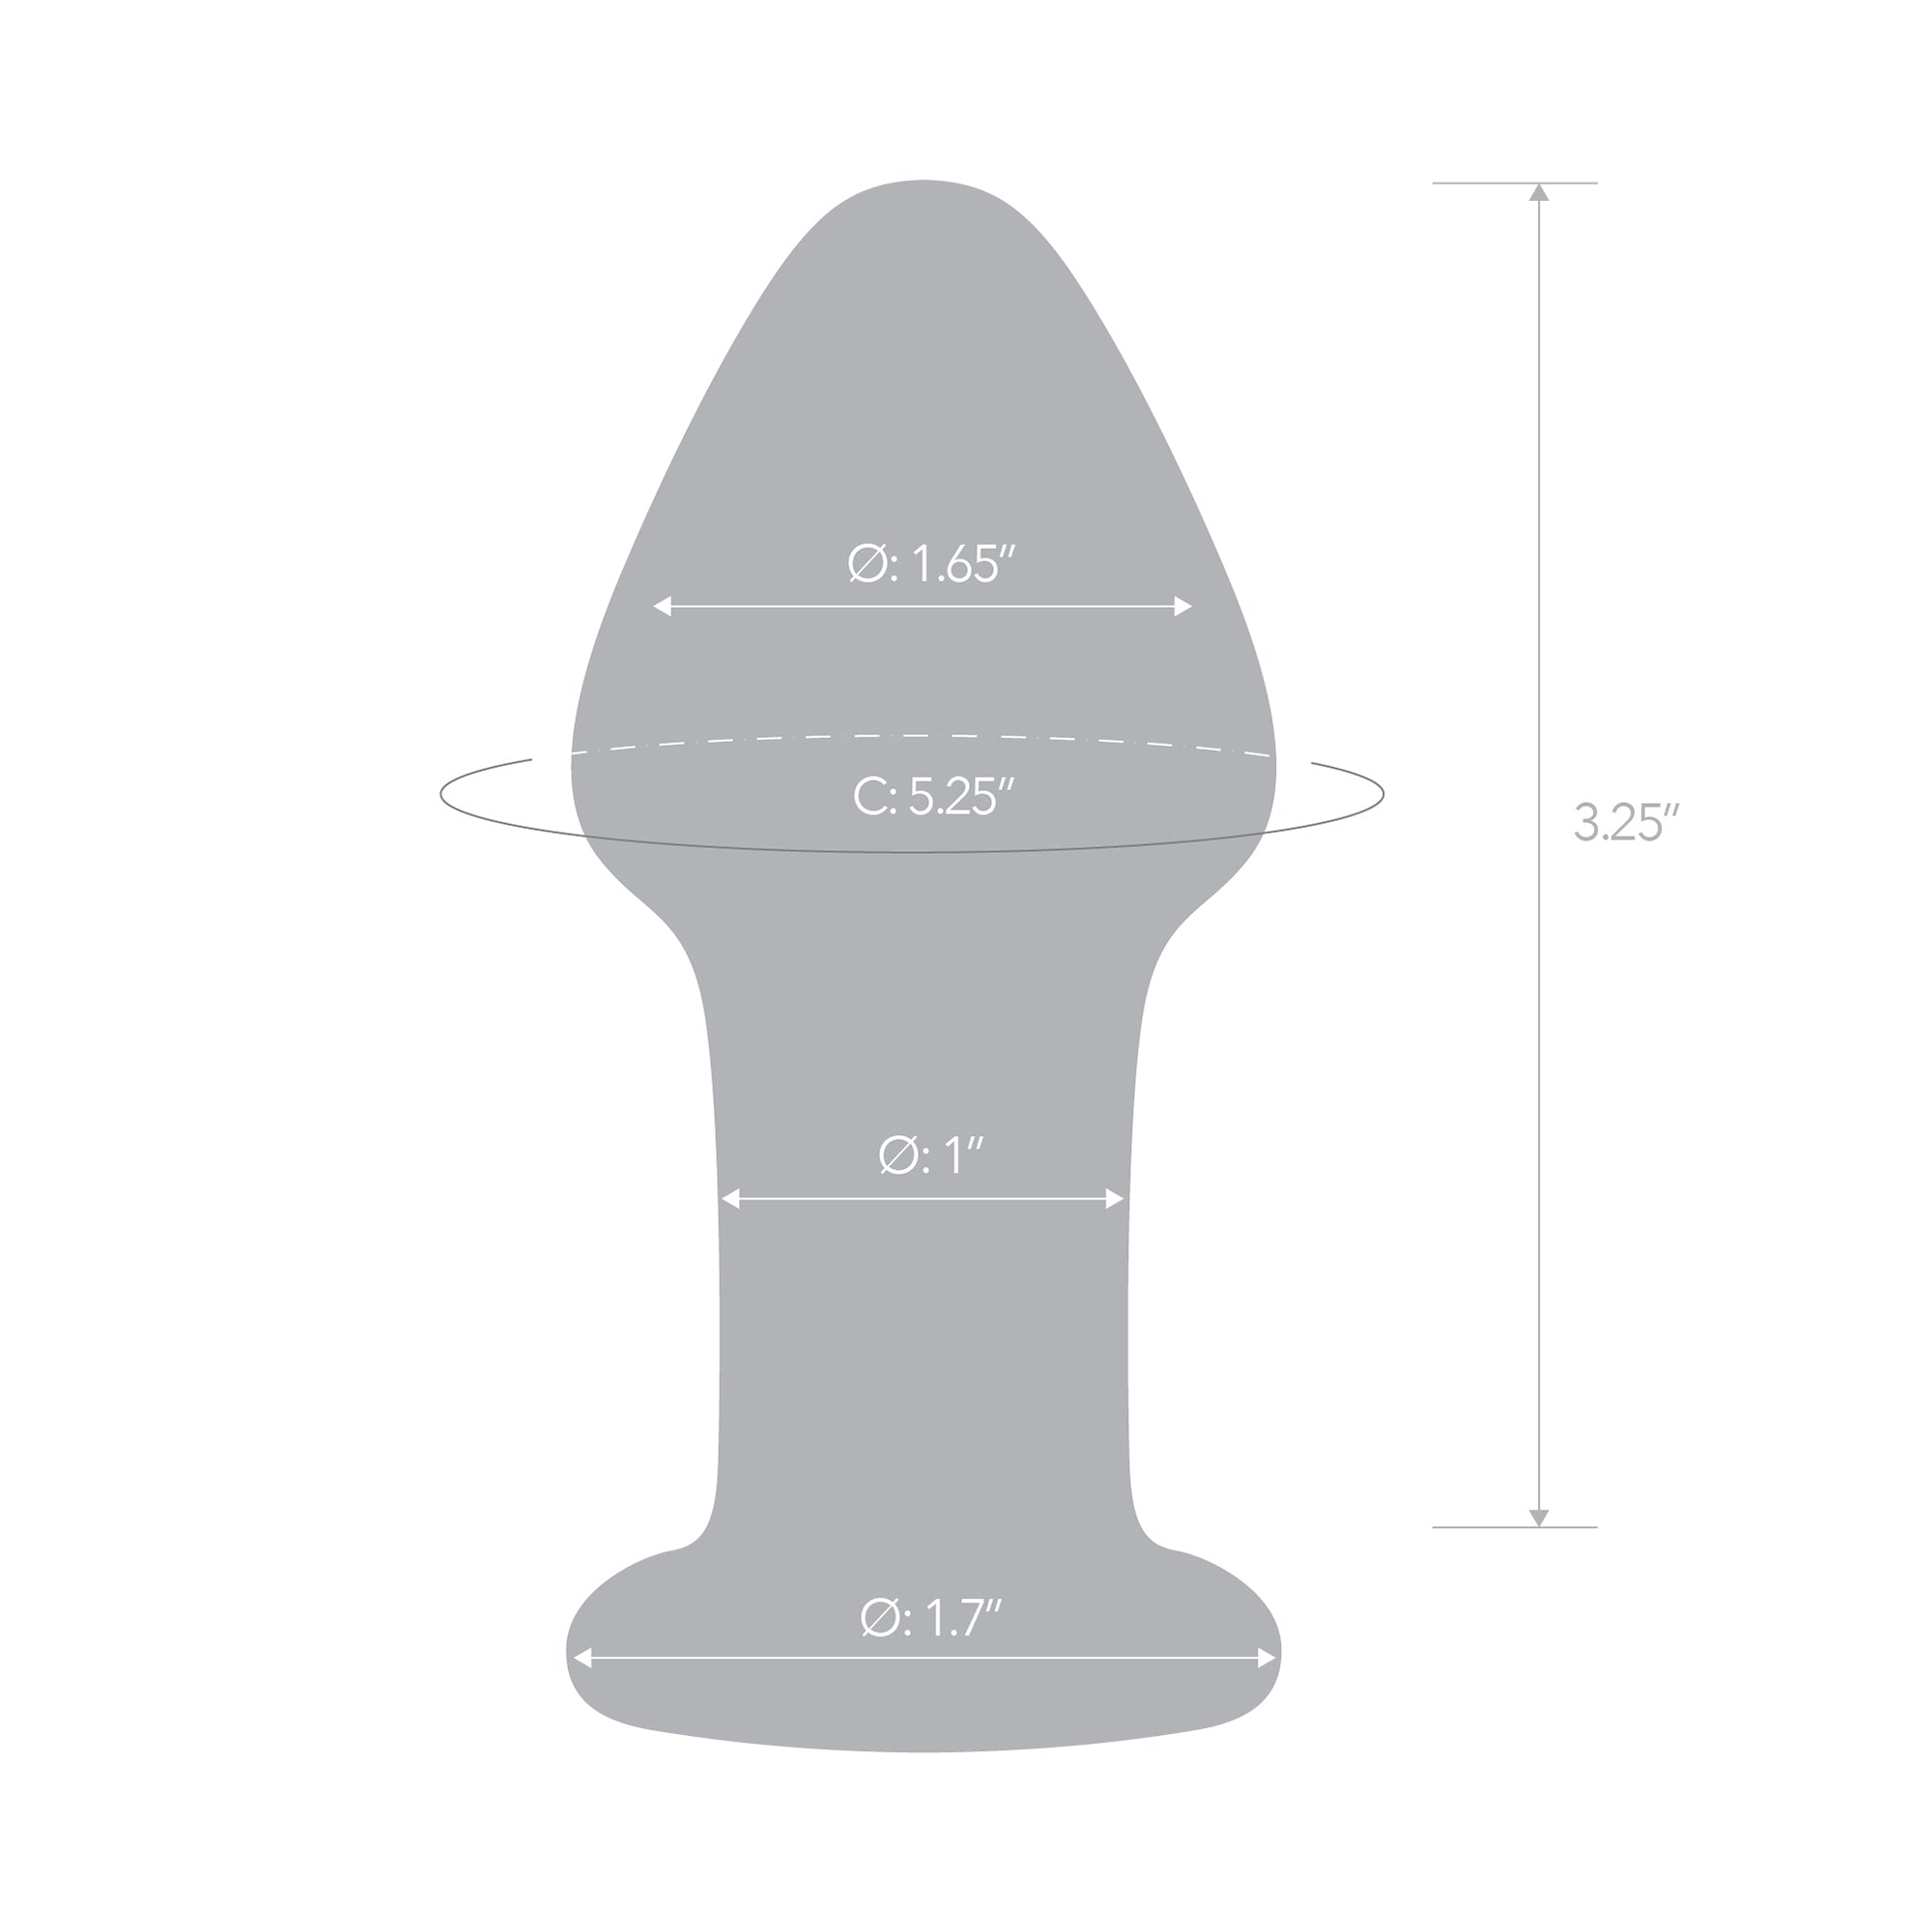 Specifications of the Gläs Over Easy Glass Butt Plug